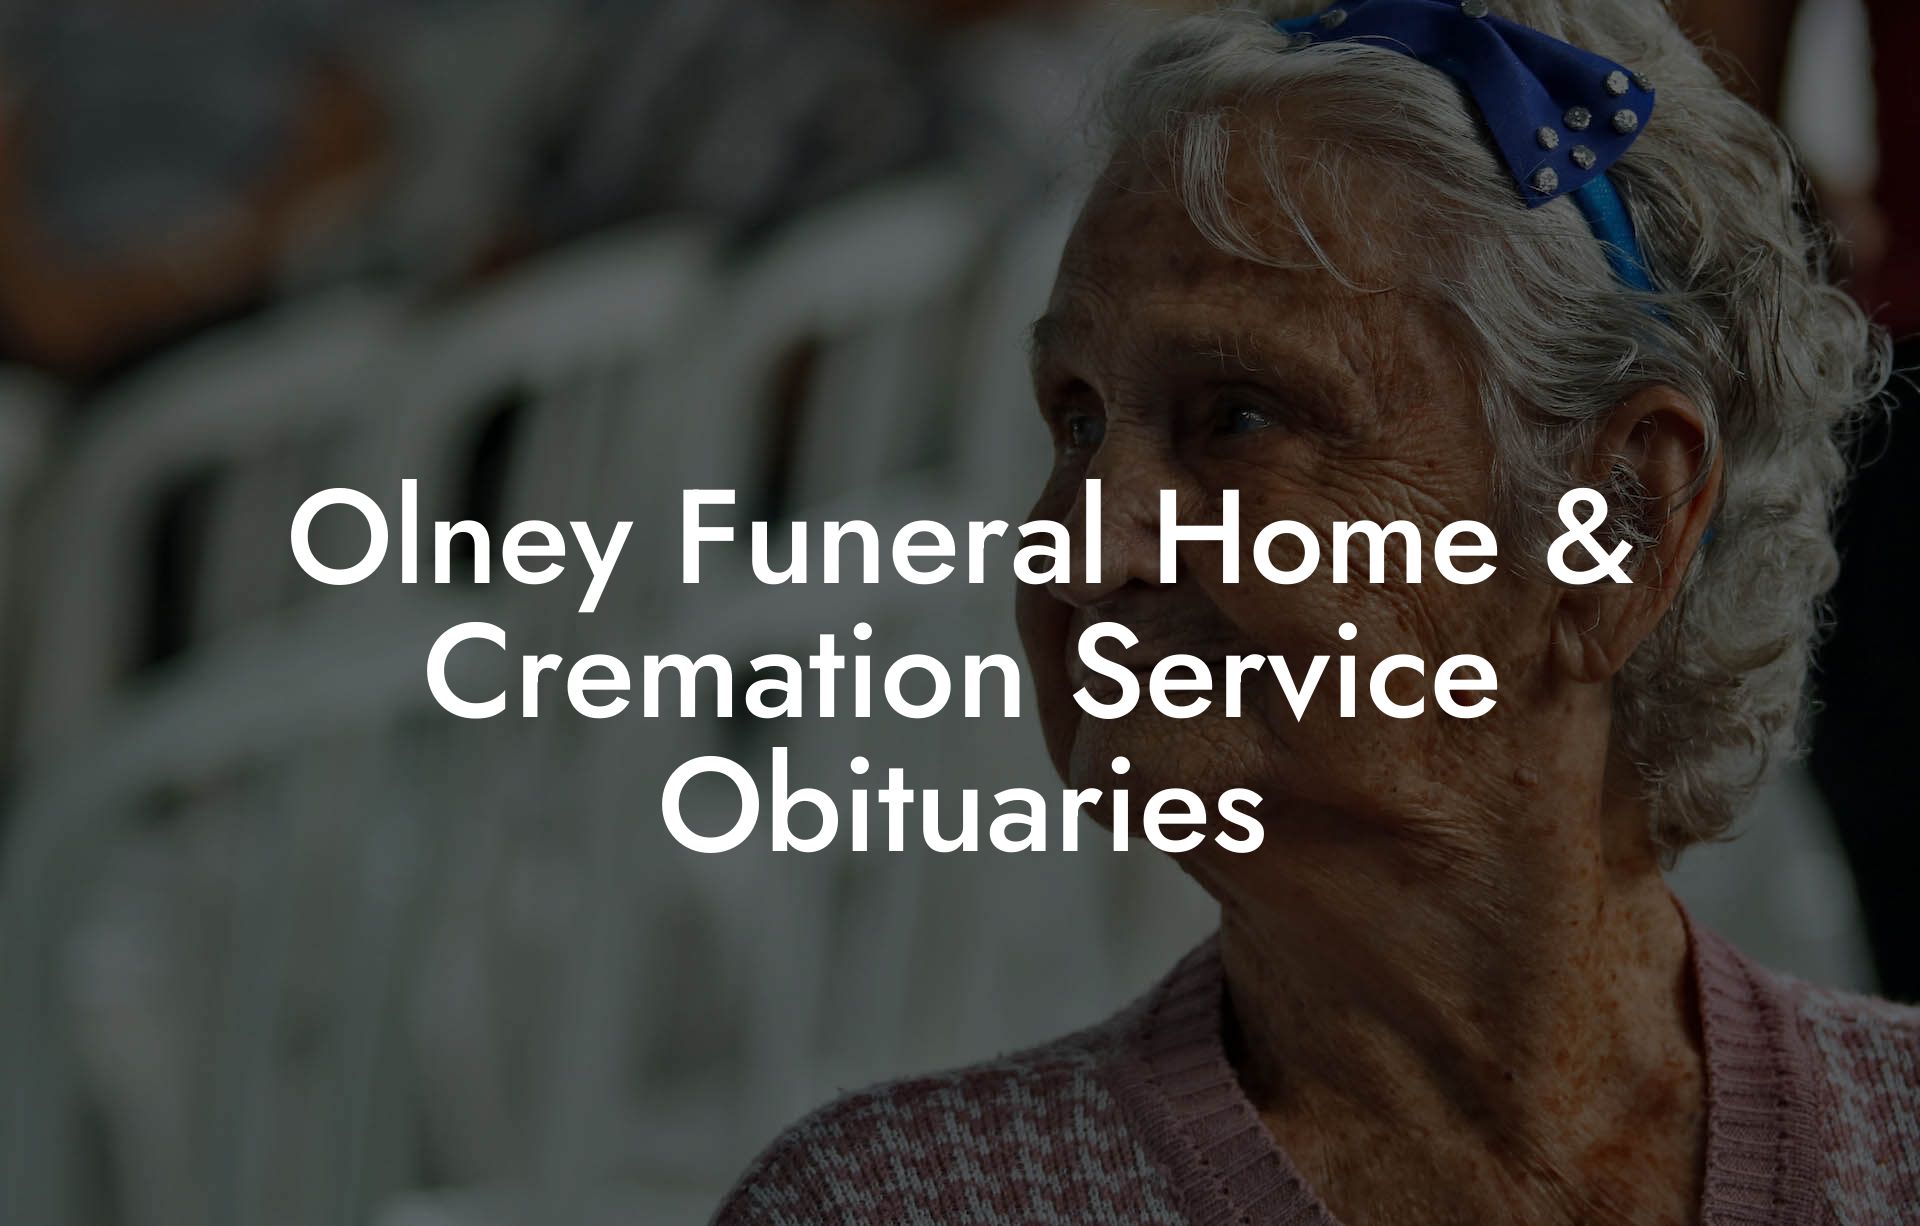 Olney Funeral Home & Cremation Service Obituaries